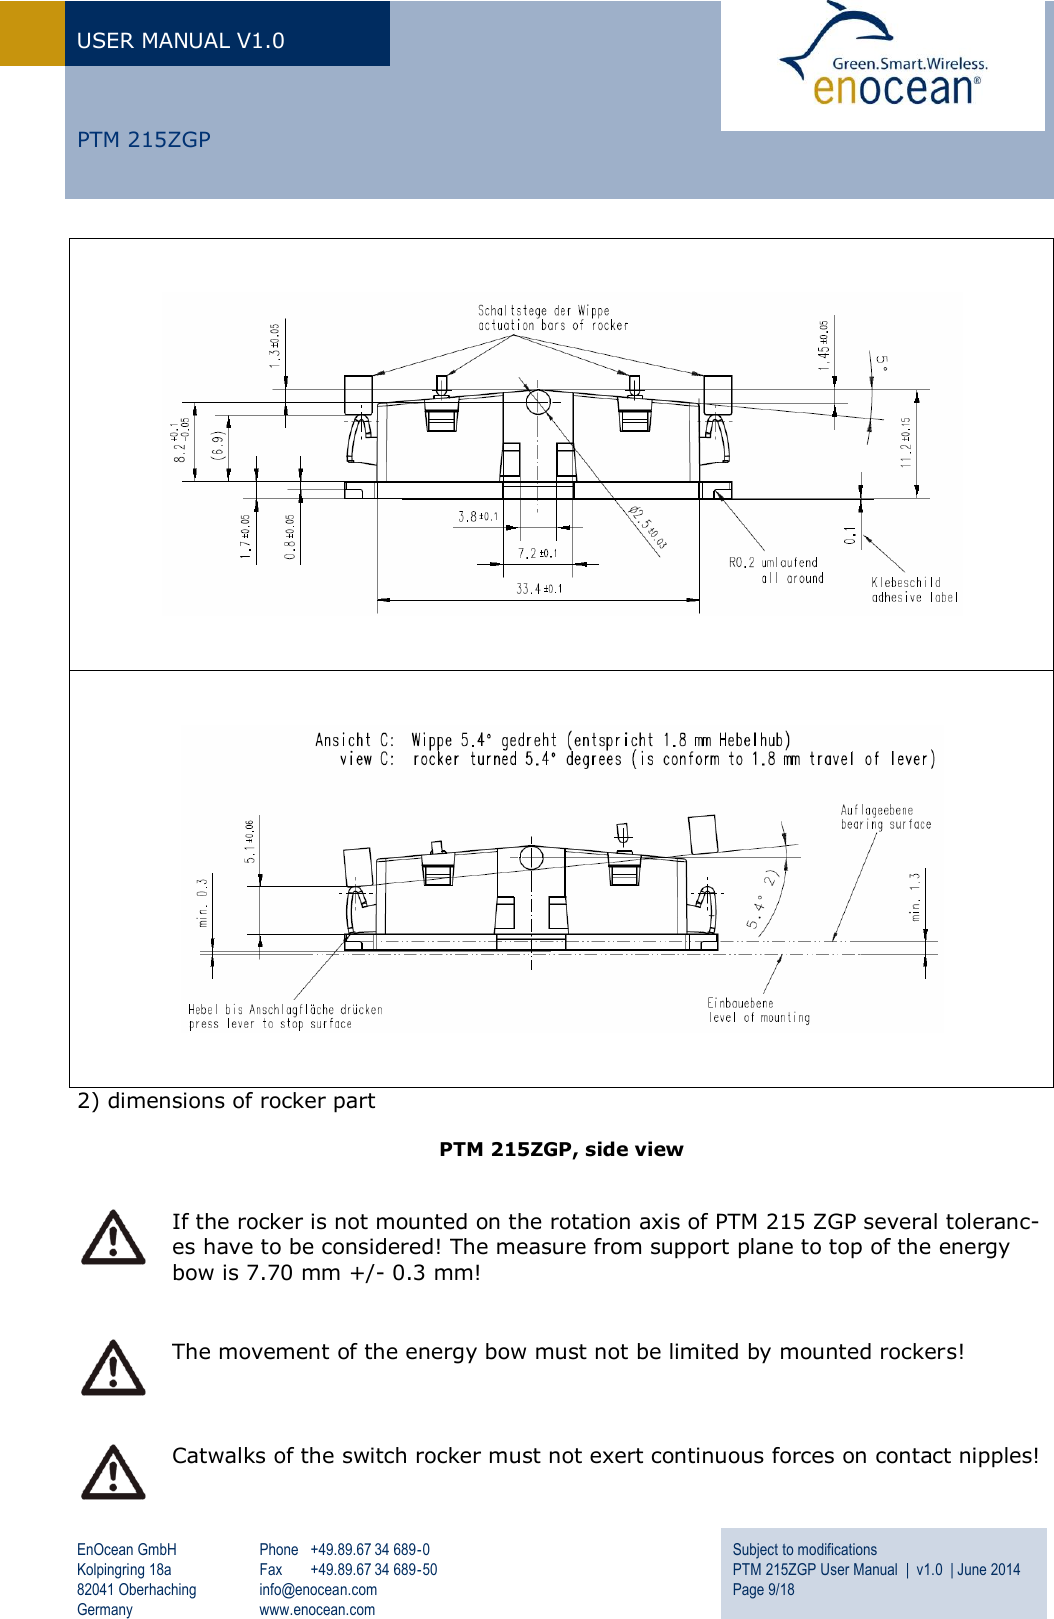 USER MANUAL V1.0   EnOcean GmbH Kolpingring 18a 82041 Oberhaching Germany Phone  +49.89.67 34 689-0 Fax  +49.89.67 34 689-50 info@enocean.com www.enocean.com Subject to modifications PTM 215ZGP User Manual  |  v1.0  | June 2014 Page 9/18      PTM 215ZGP       2) dimensions of rocker part  PTM 215ZGP, side view    If the rocker is not mounted on the rotation axis of PTM 215 ZGP several toleranc-es have to be considered! The measure from support plane to top of the energy bow is 7.70 mm +/- 0.3 mm!   The movement of the energy bow must not be limited by mounted rockers!    Catwalks of the switch rocker must not exert continuous forces on contact nipples! 